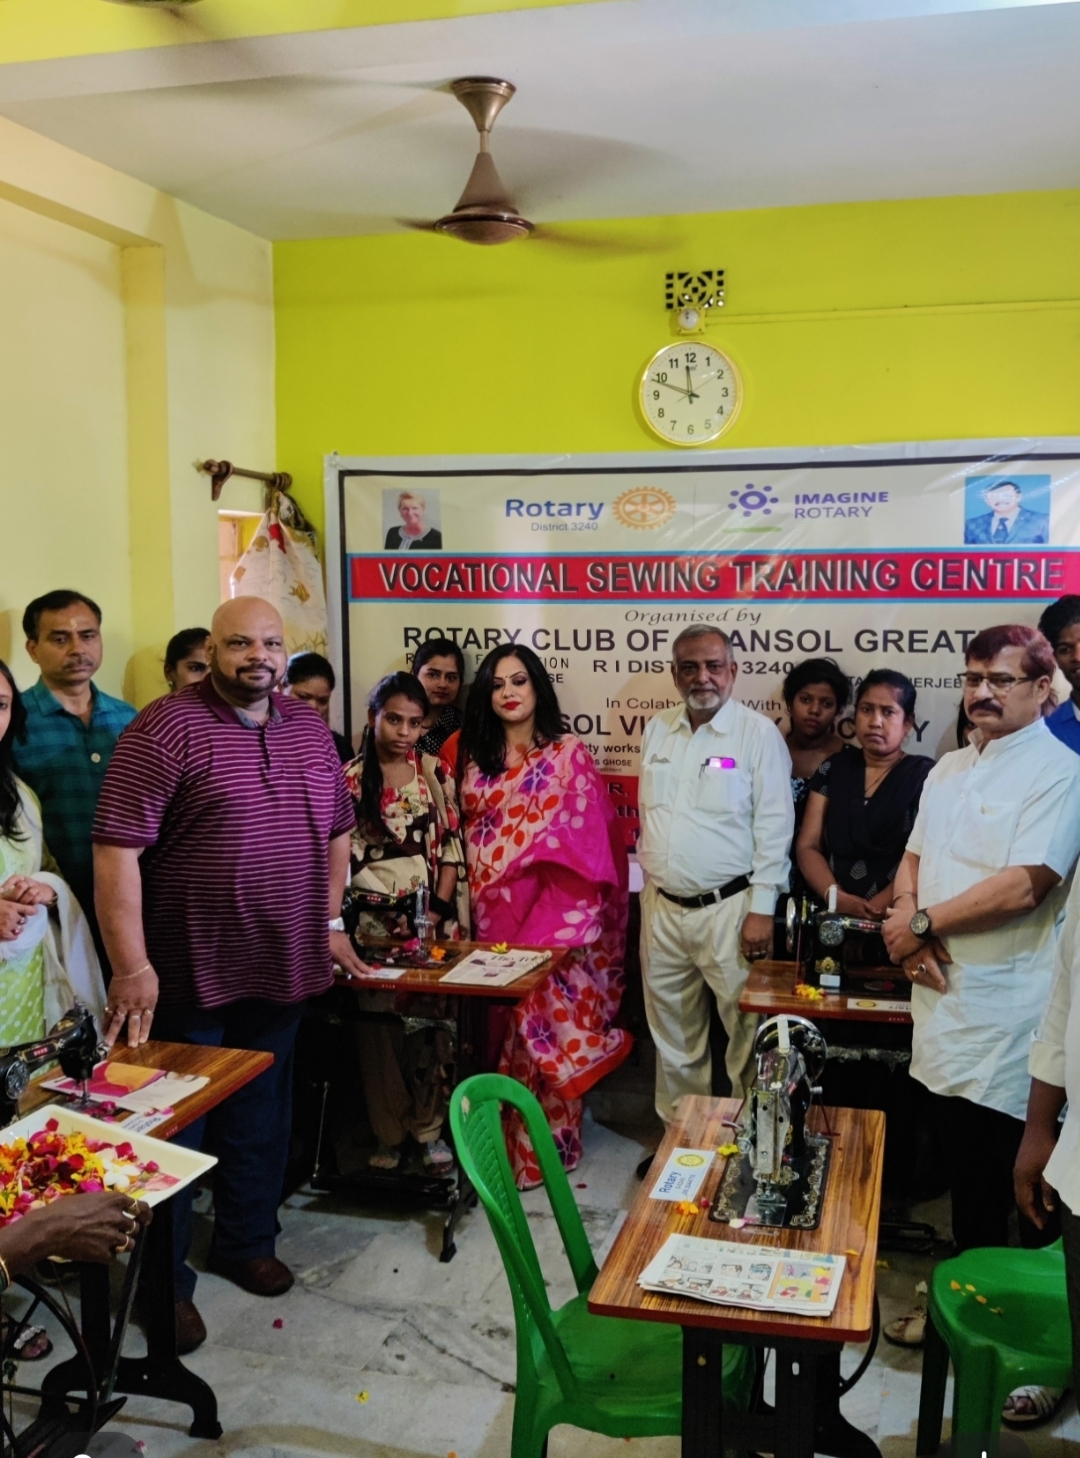 Inauguration of the Vocational Sewing Training Centre